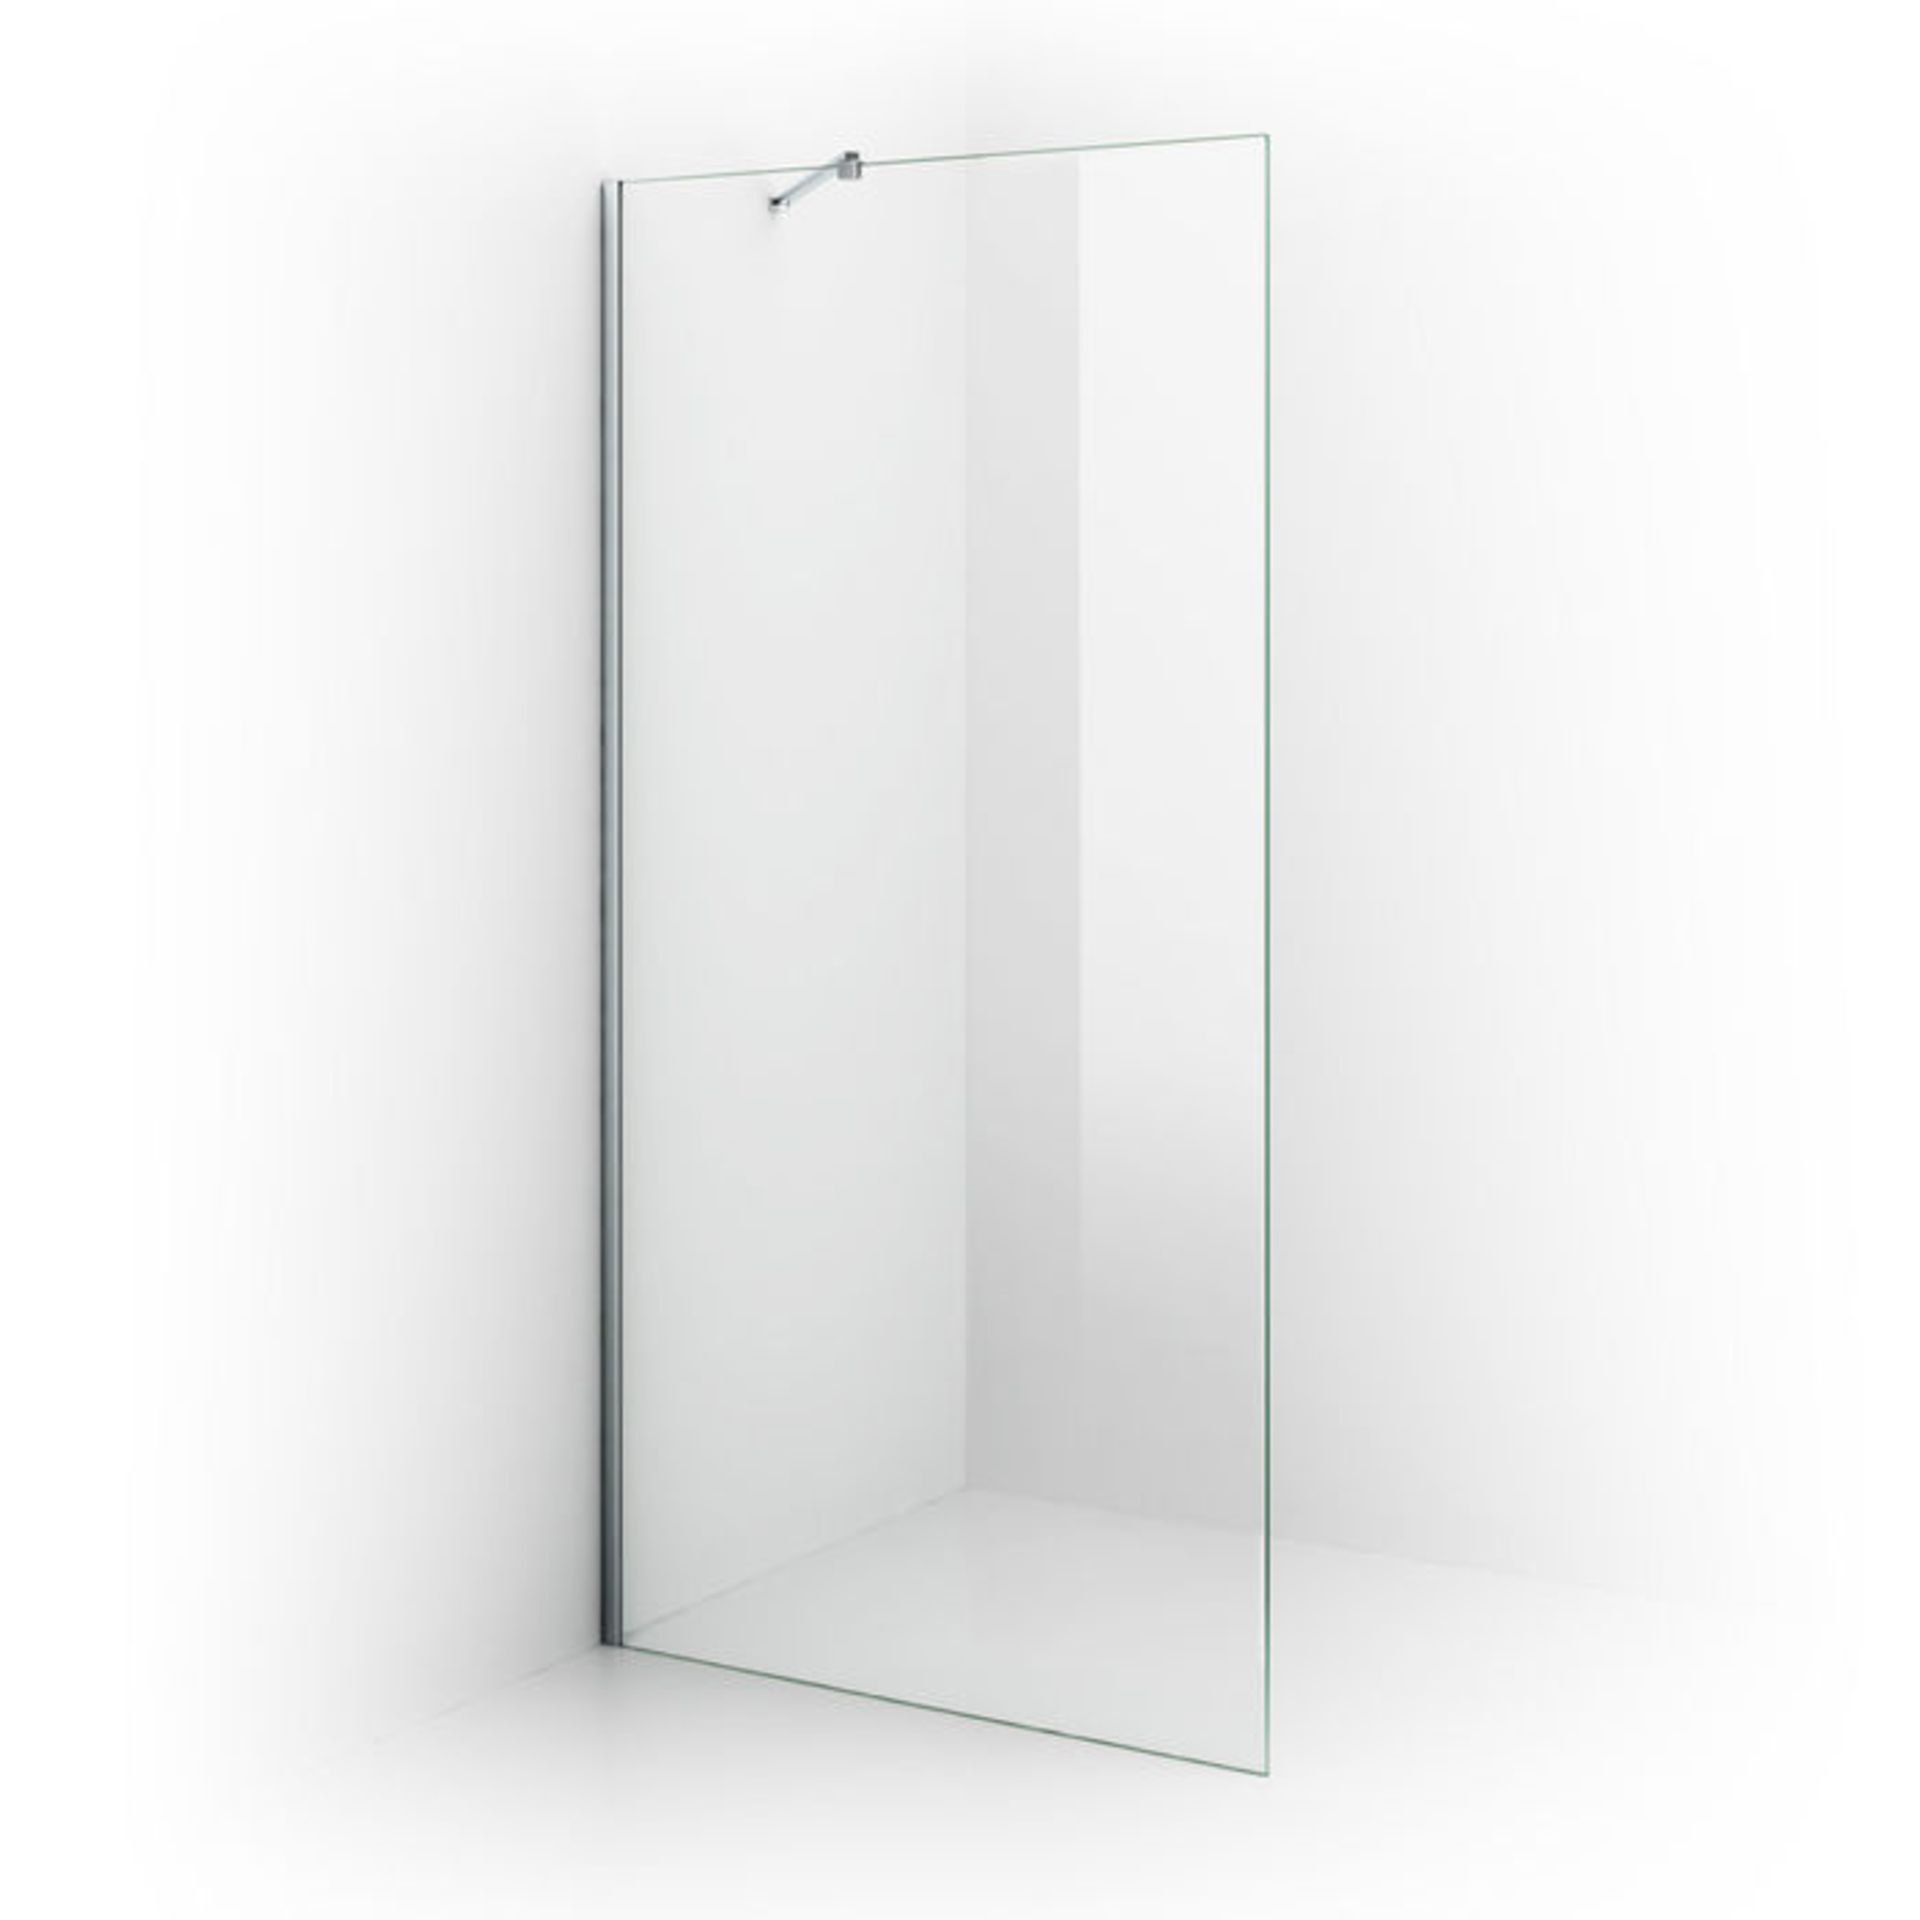 (AD24) 800mm - 8mm - Premium EasyClean Wetroom Panel. RRP £349.99. 8mm EasyClean glass - Our glass - Image 4 of 4